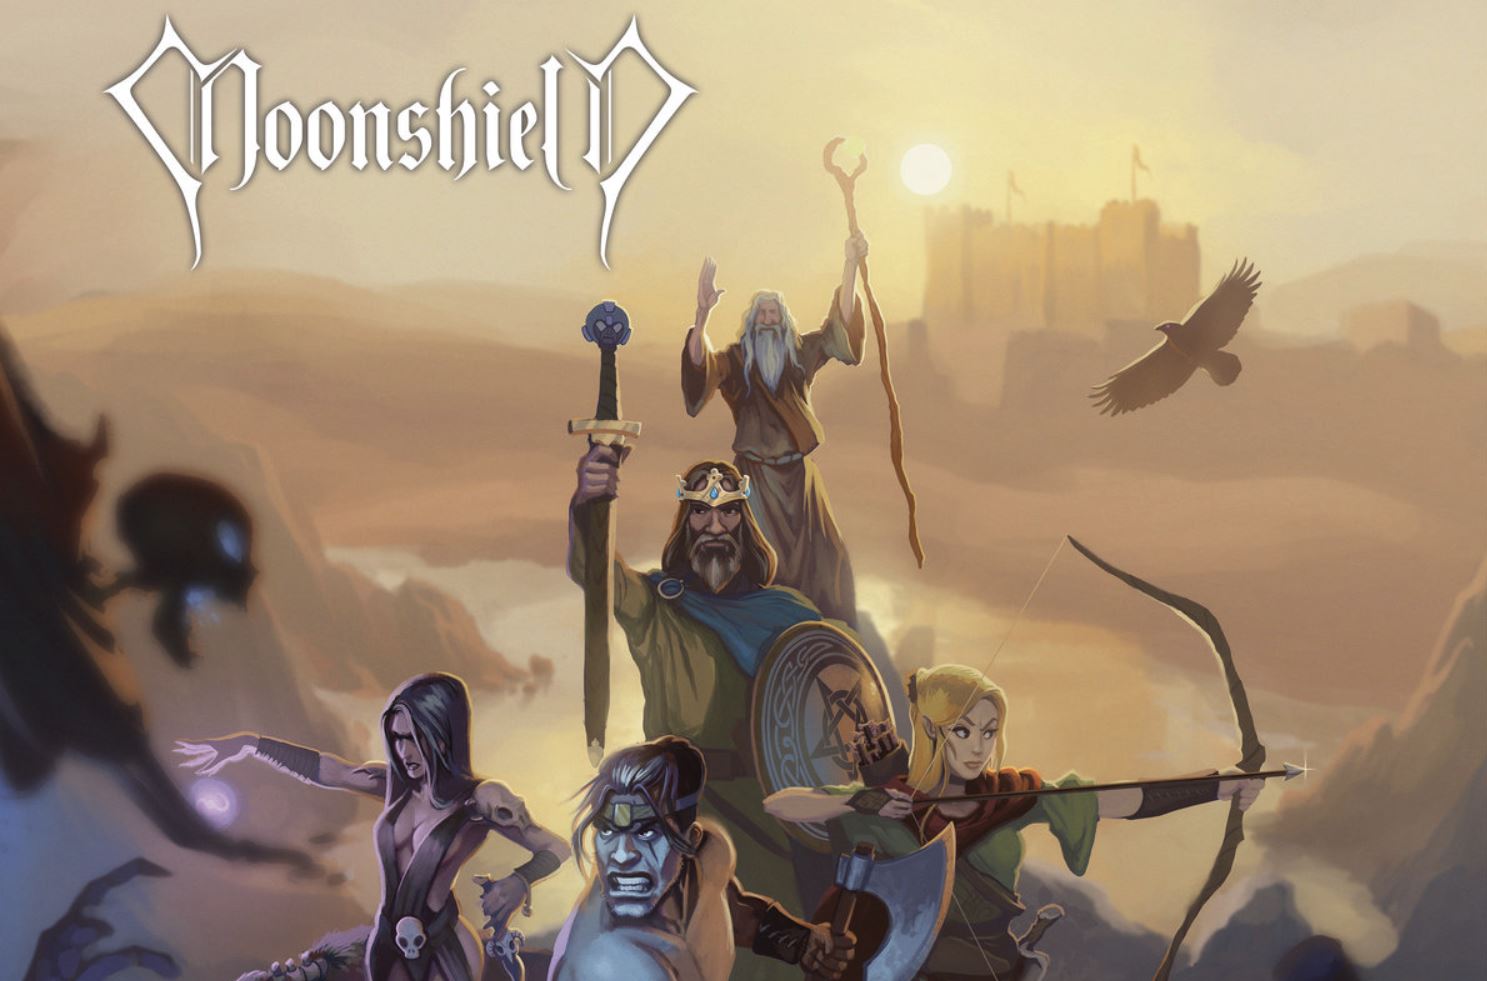 Moonshield - The Warband